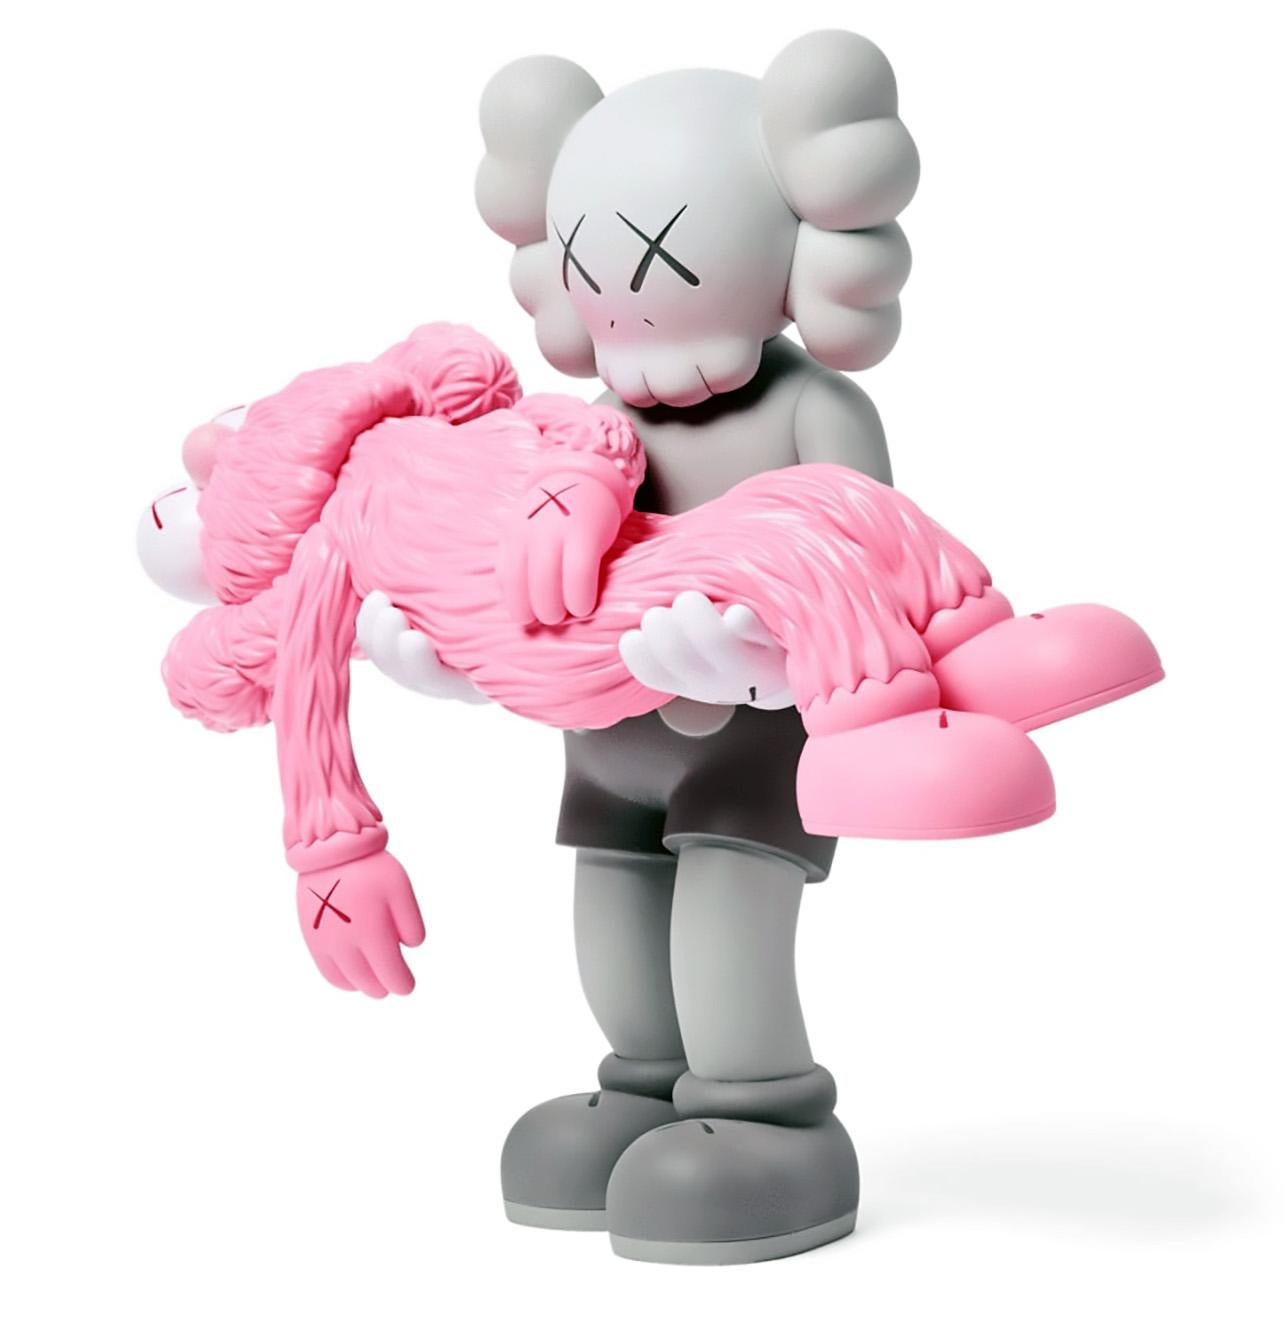 KAWS GONE Grey & KAWS Pink BFF Companions (set of 2 works 2017-2019):

Medium: Vinyl paint & Cast Resin (applies to each work). Published 2017 & 2019, respectively.
GONE: 14.25 x 7 inches.
BFF: 13 x 5.7 inches.
Each new, unopened in their original